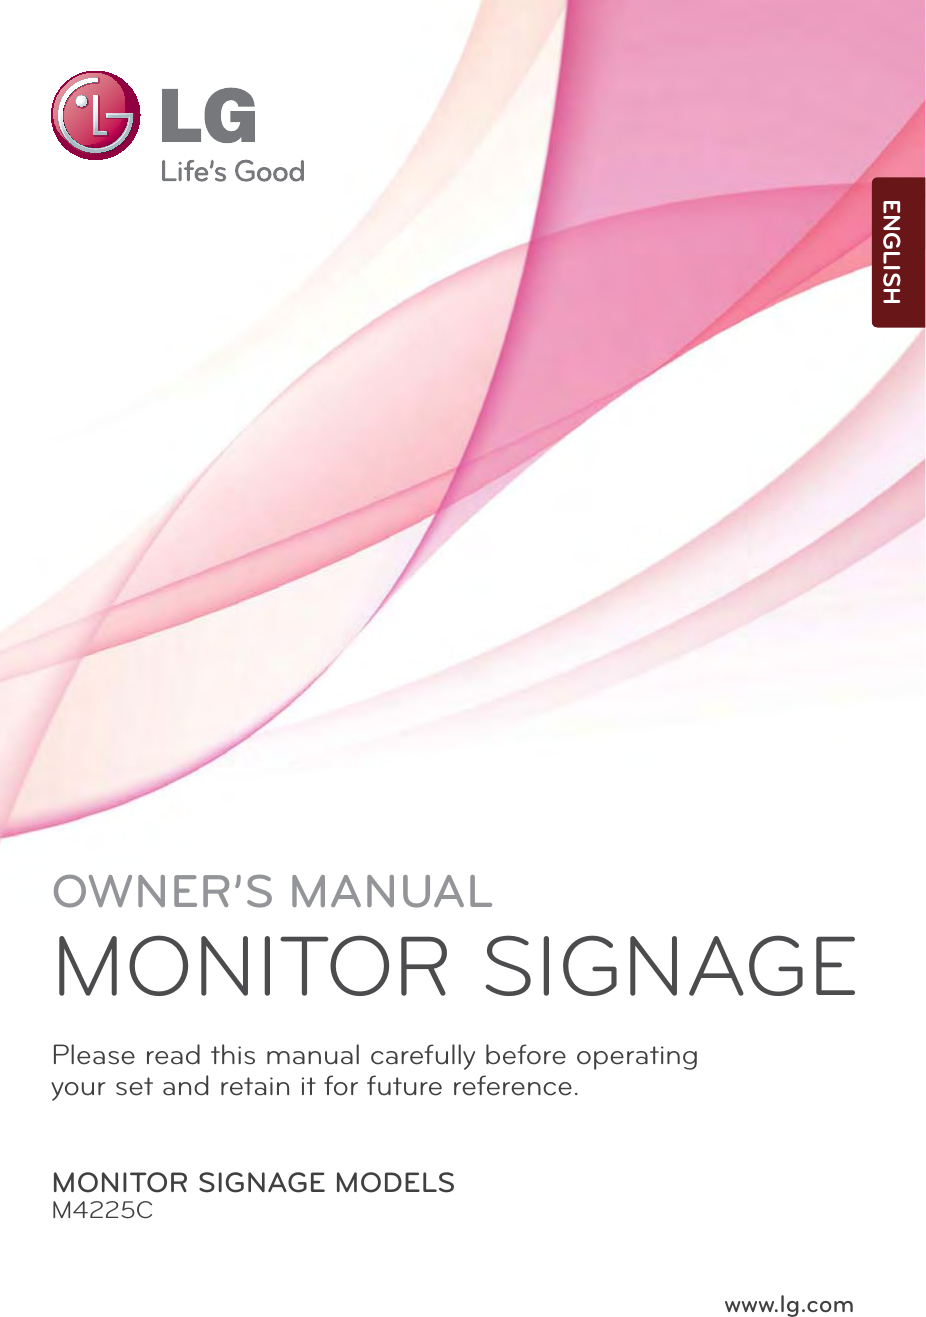 www.lg.comOWNER’S MANUALMONITOR SIGNAGEMONITOR SIGNAGE MODELSM4225CPlease read this manual carefully before operatingyour set and retain it for future reference.ENGLISH